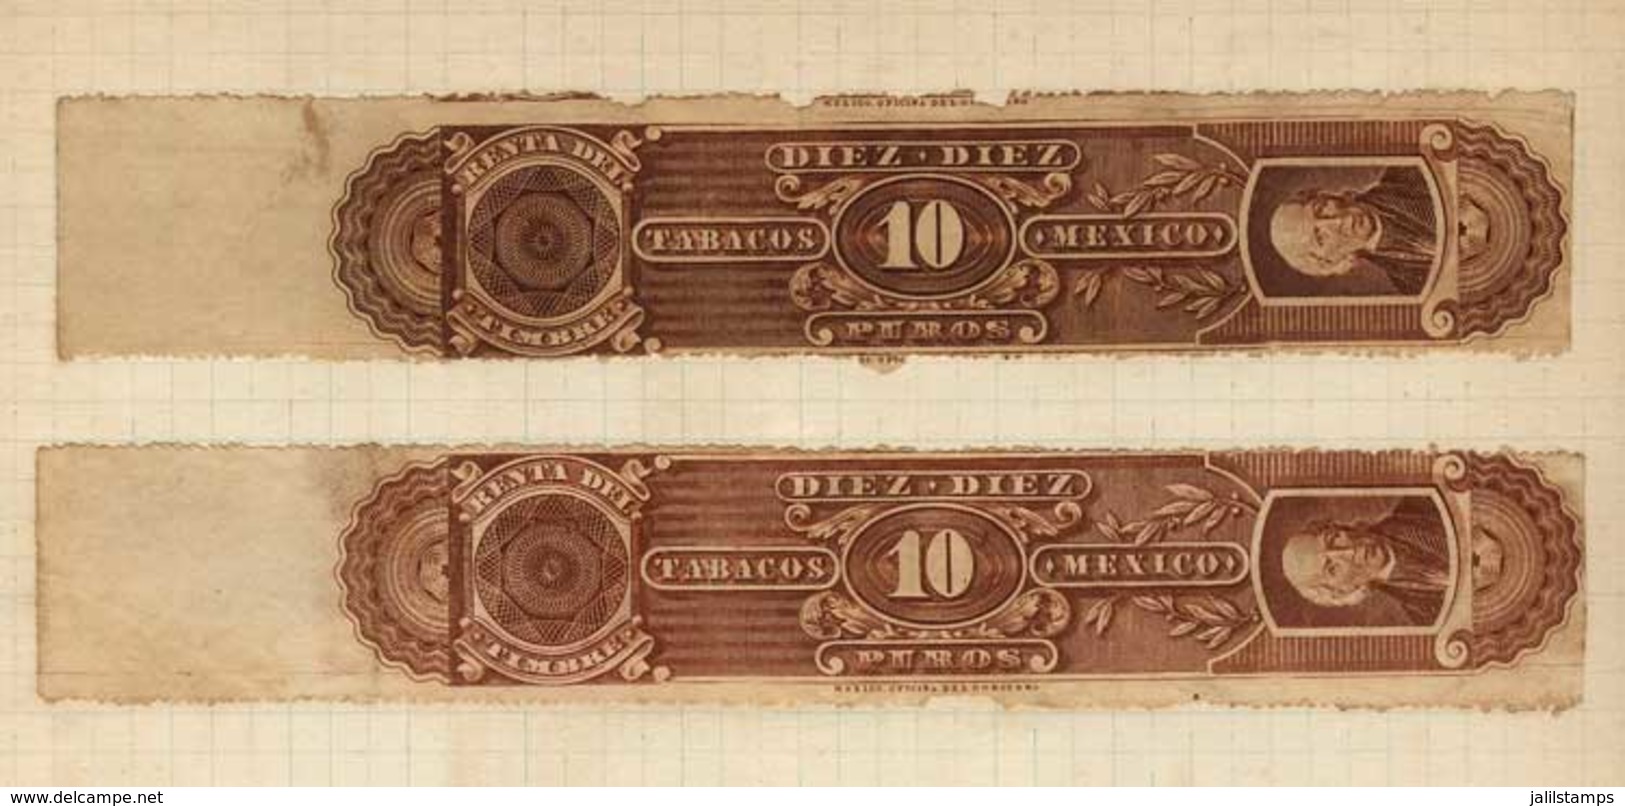 MEXICO: TOBACCO: 2 Pages Of An Old Collection With 13 Very Interesting Stamps, Some With Little Defects, Very Nice! - Mexico